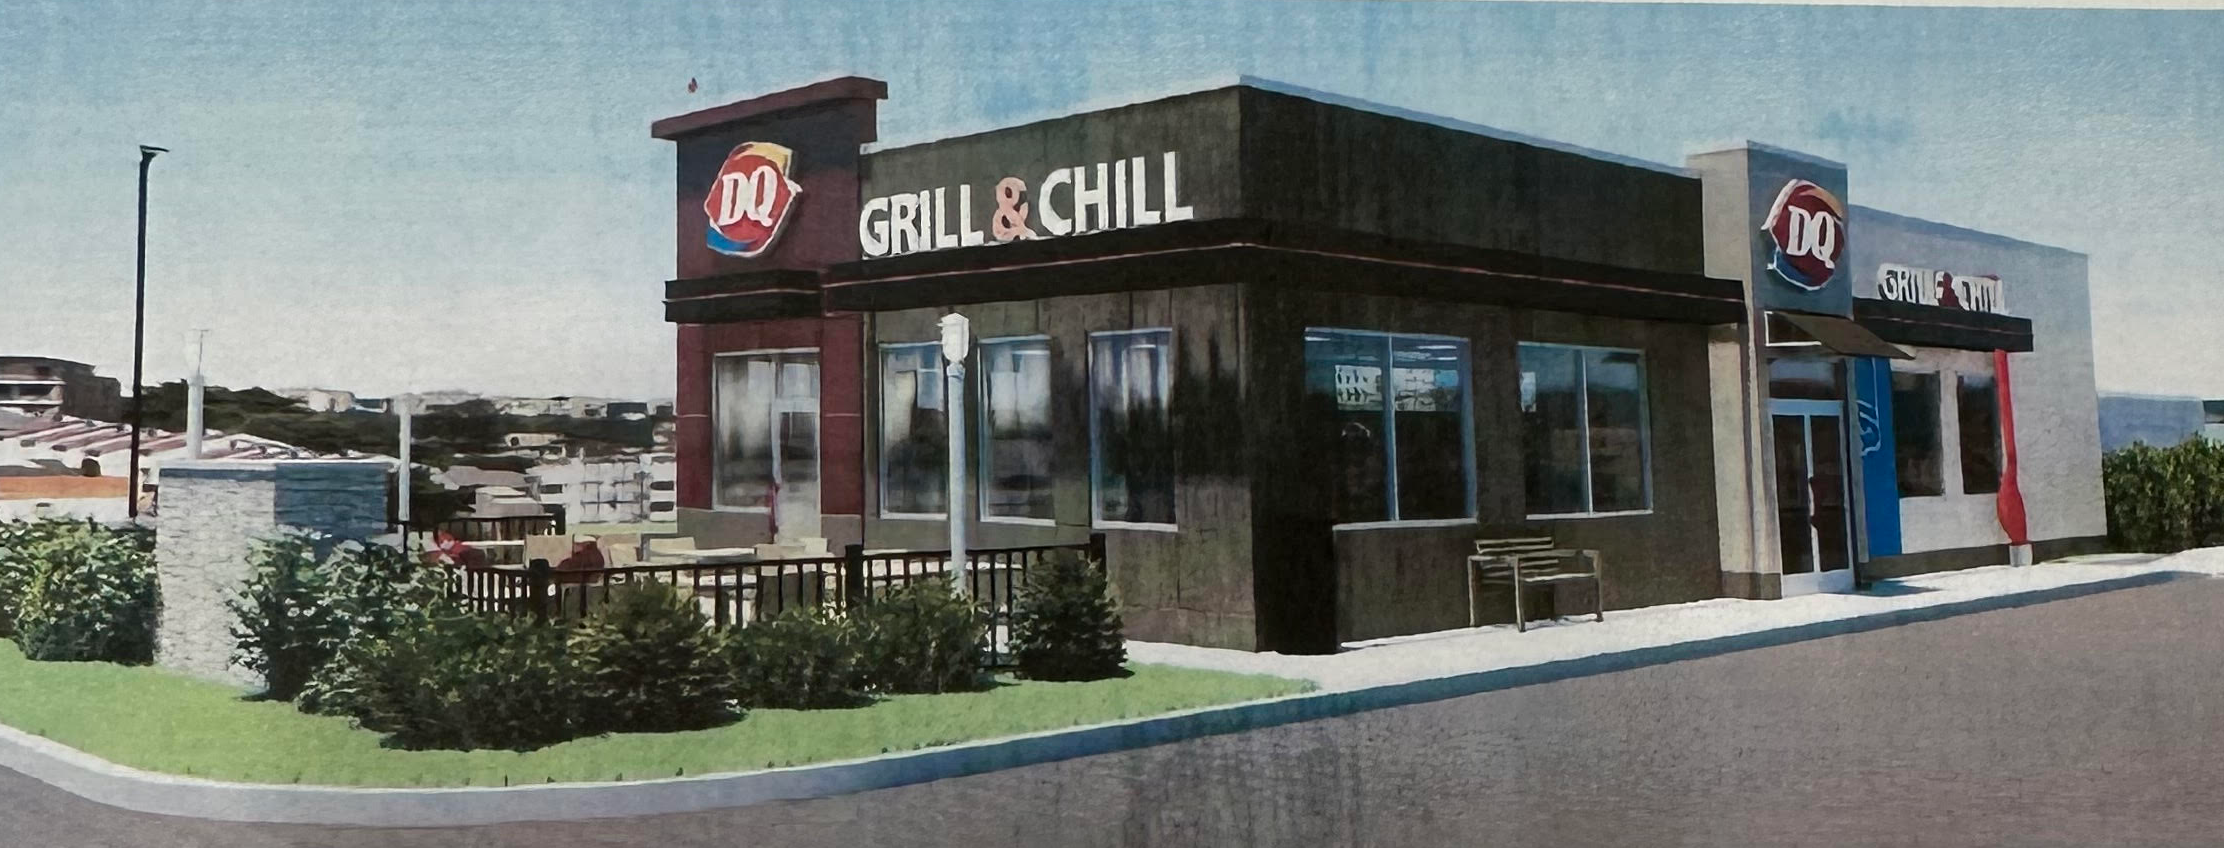 Dairy Queen’s New Location Will Have Modern Look, More Seating Photo